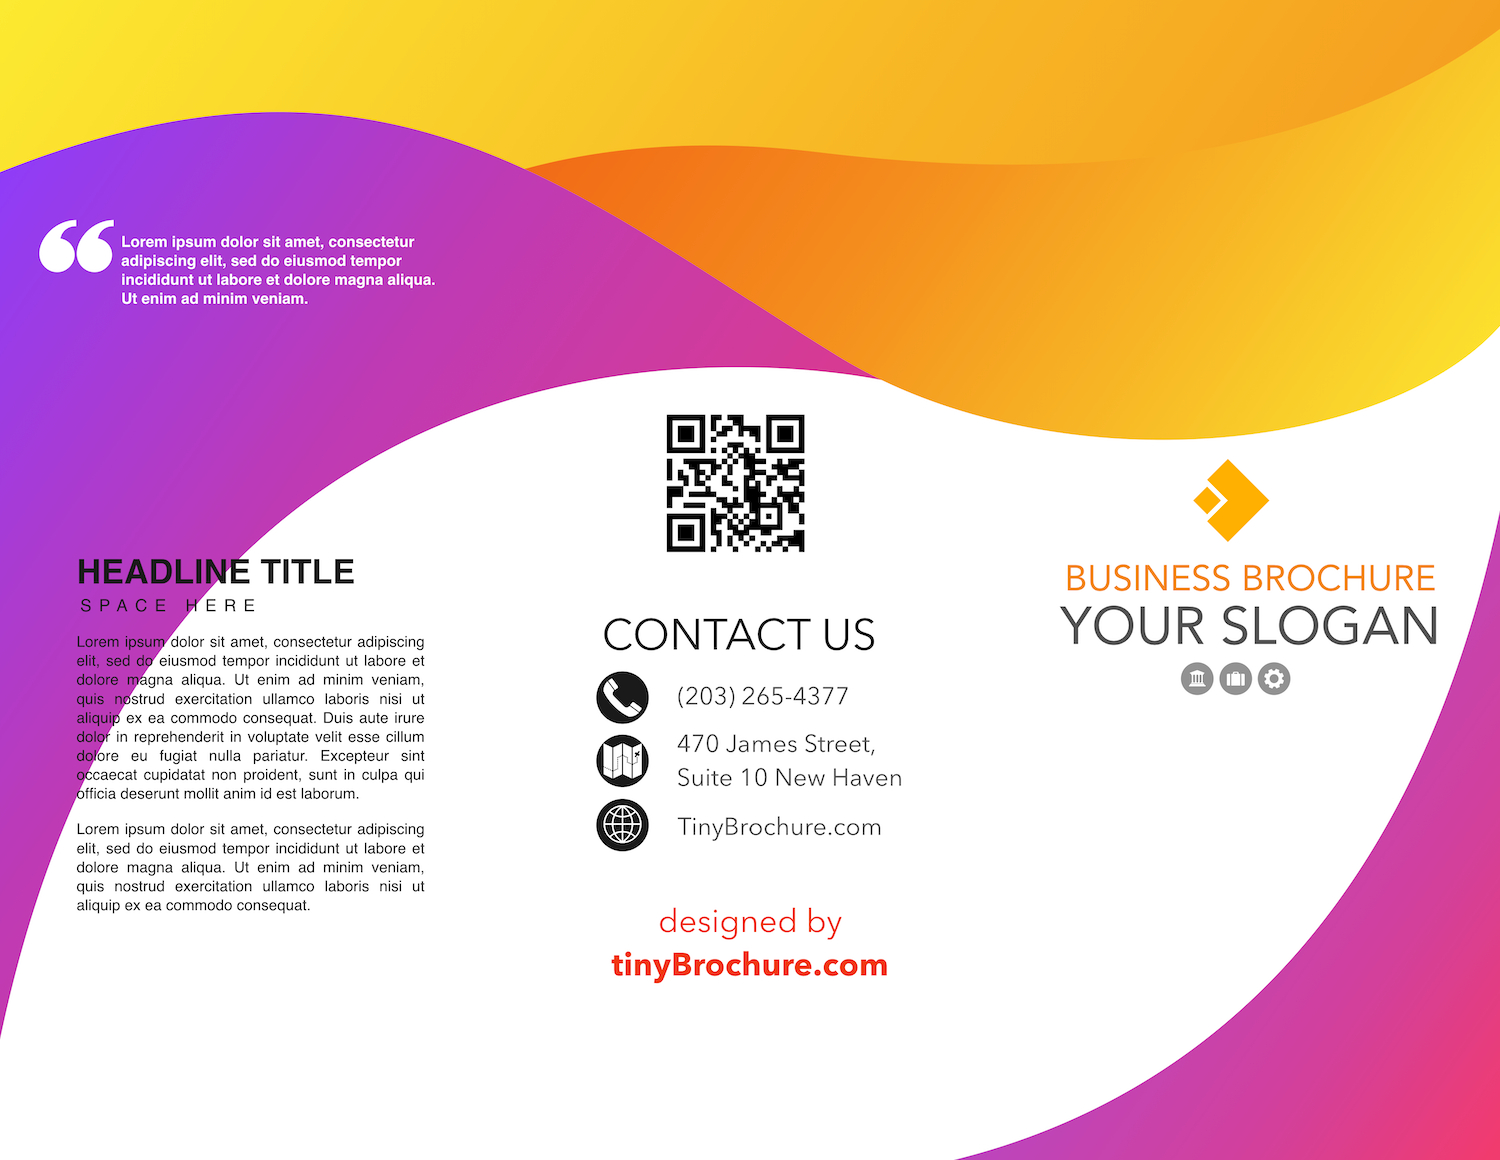 How To Make A Tri Fold Brochure In Google Docs Intended For Google Docs Travel Brochure Template